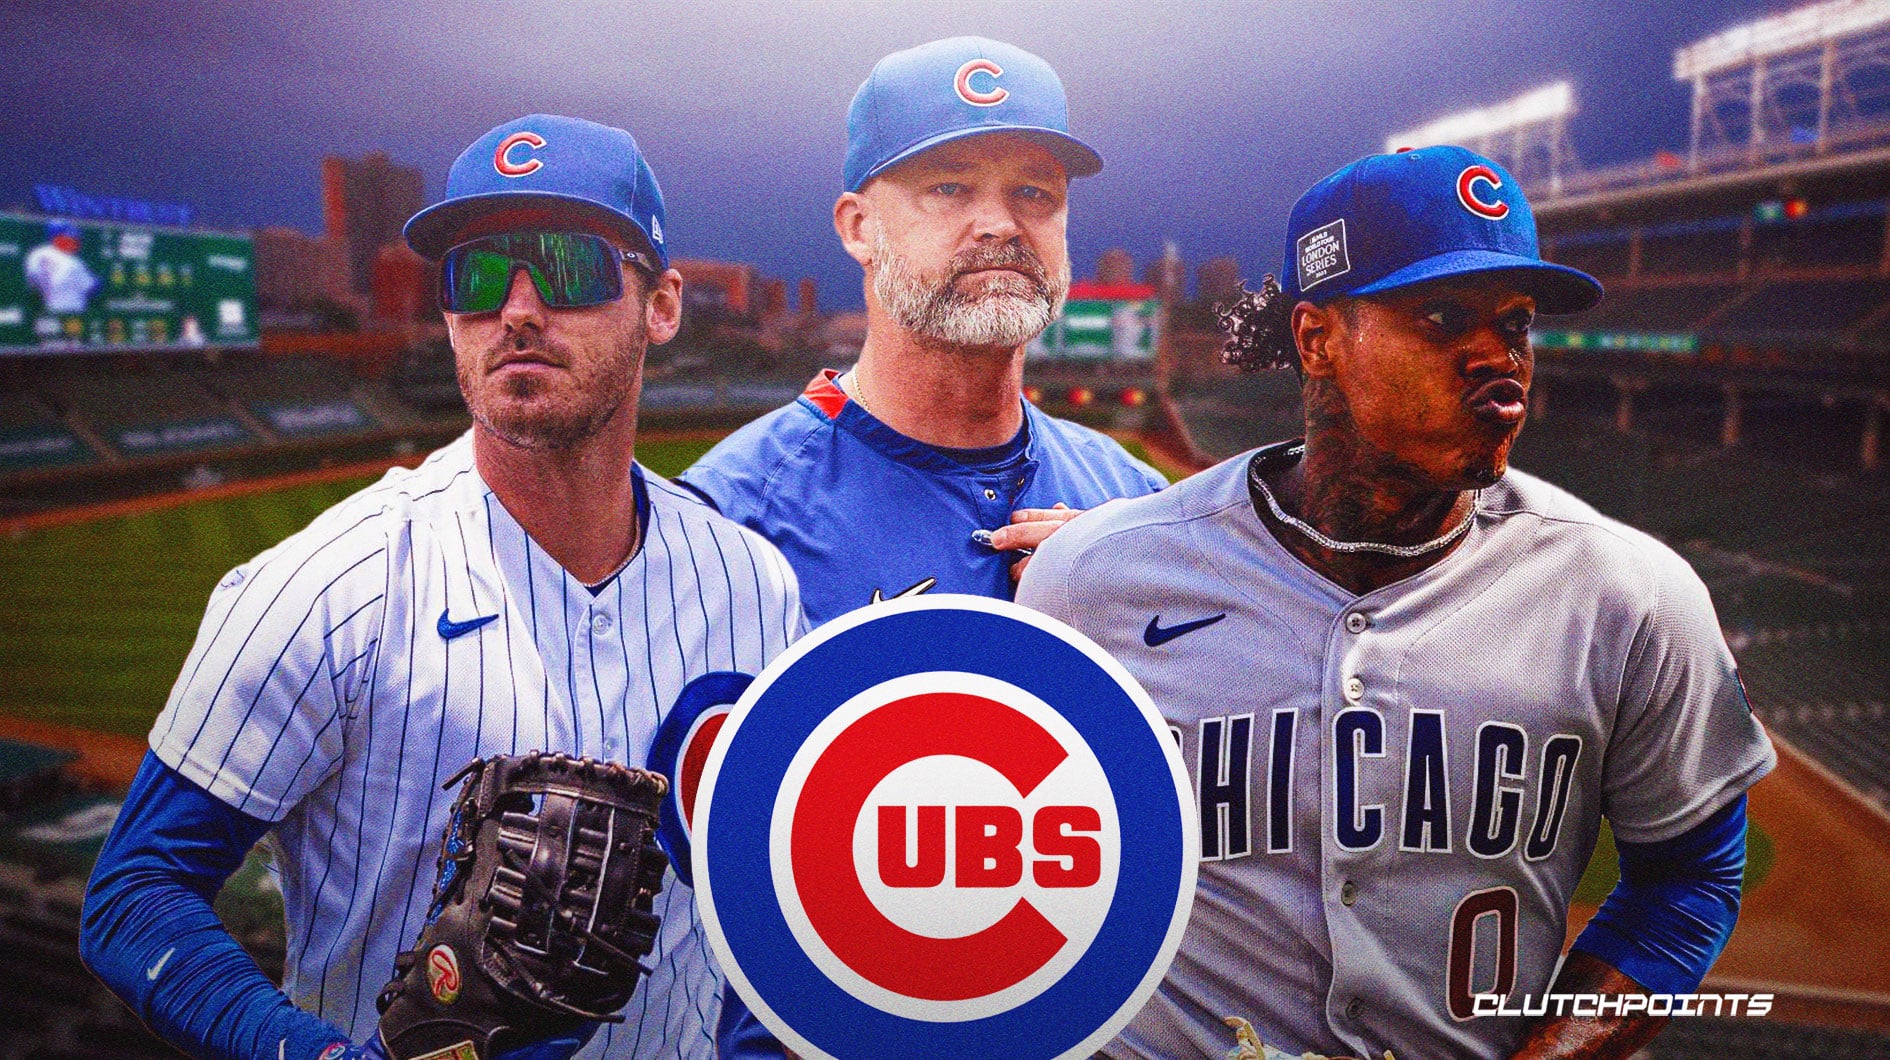 10-game home-stand after All-Star break will determine if Cubs buy